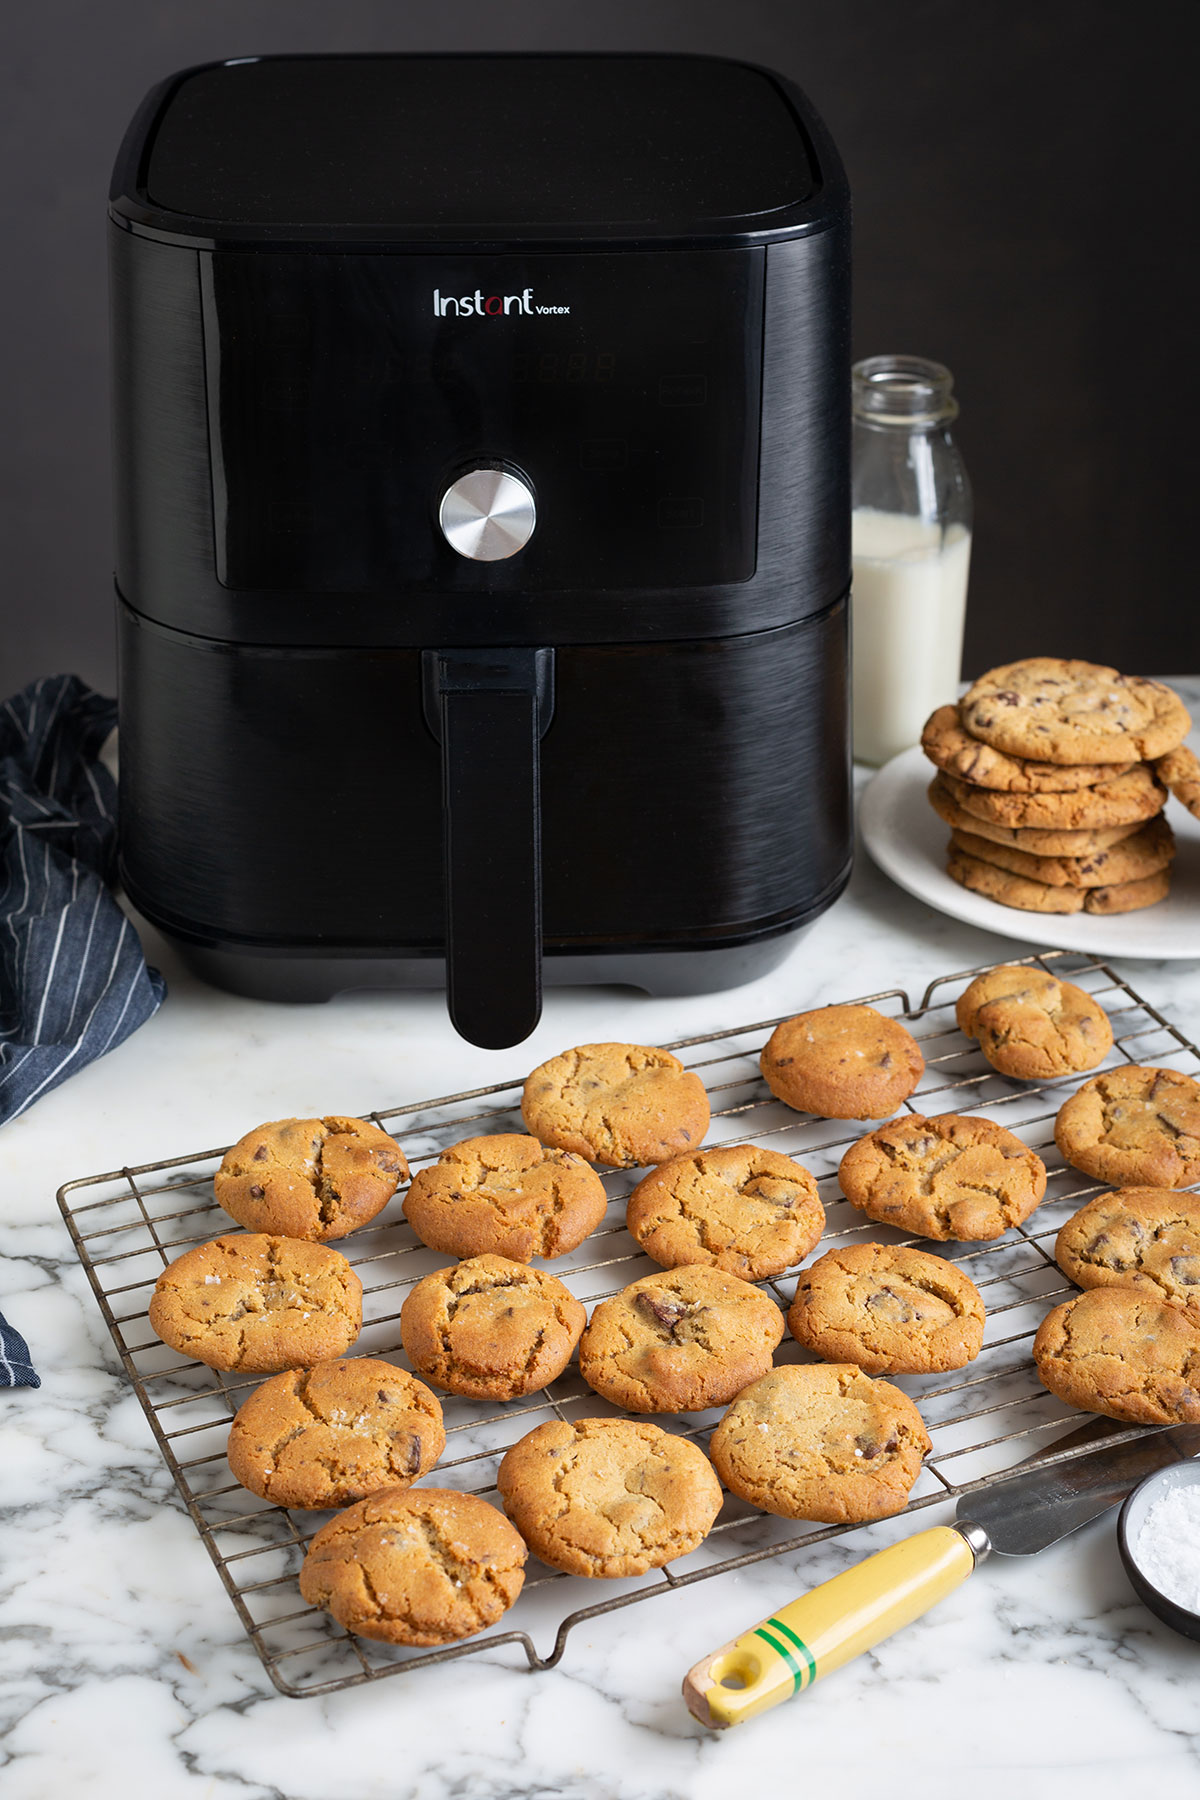 Easy oven to air fryer conversion guide